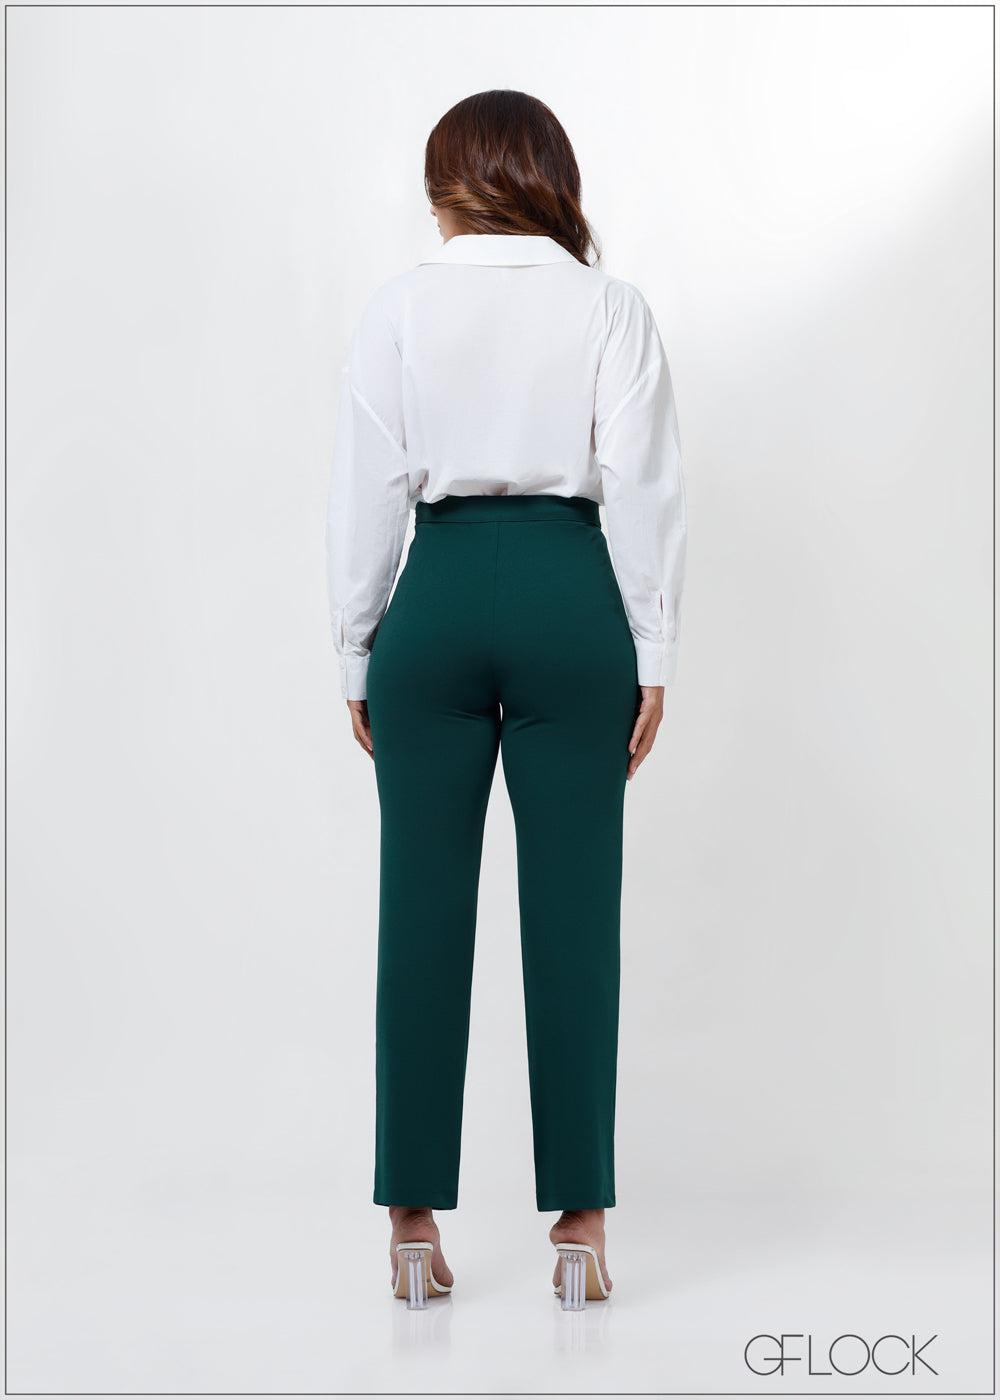 Plain Ladies high waist Trousers, Model Name/Number: Rfd Dusty Pink Trouser  at Rs 350/piece in Ghaziabad